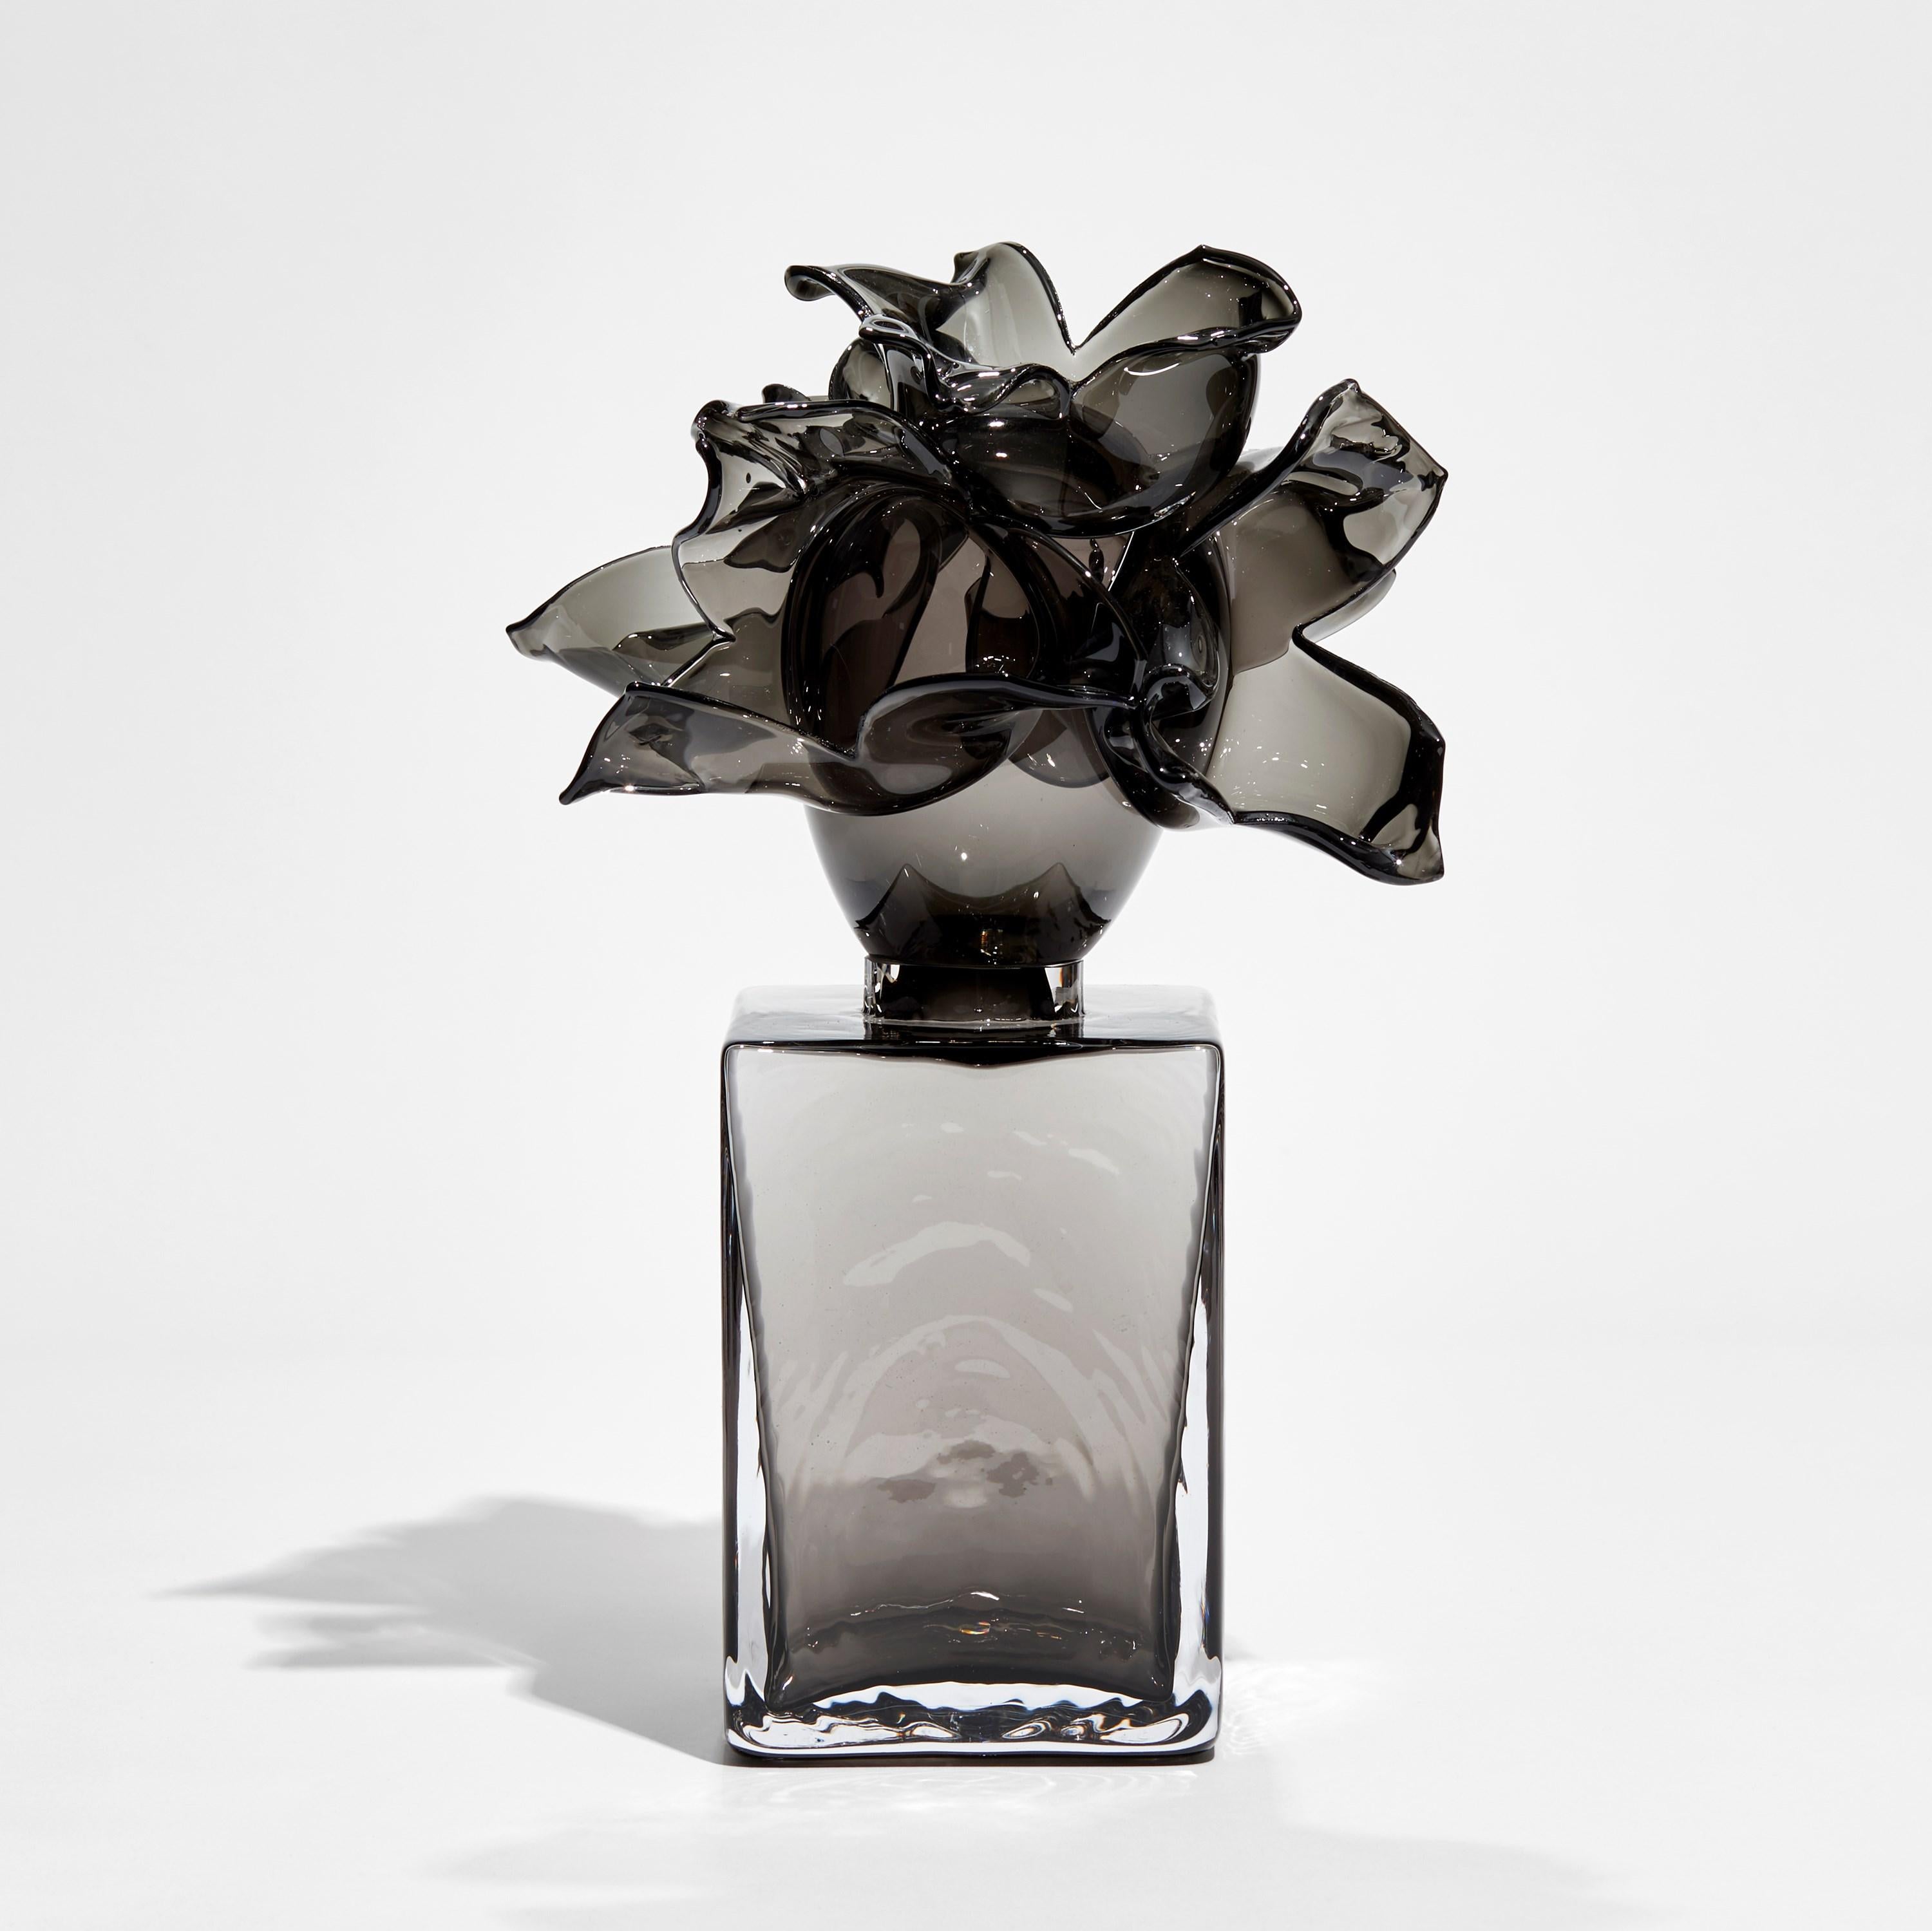 Organic Modern Anemone in Grey, a limited edition Sculpted Glass Artwork by Lena Bergström For Sale